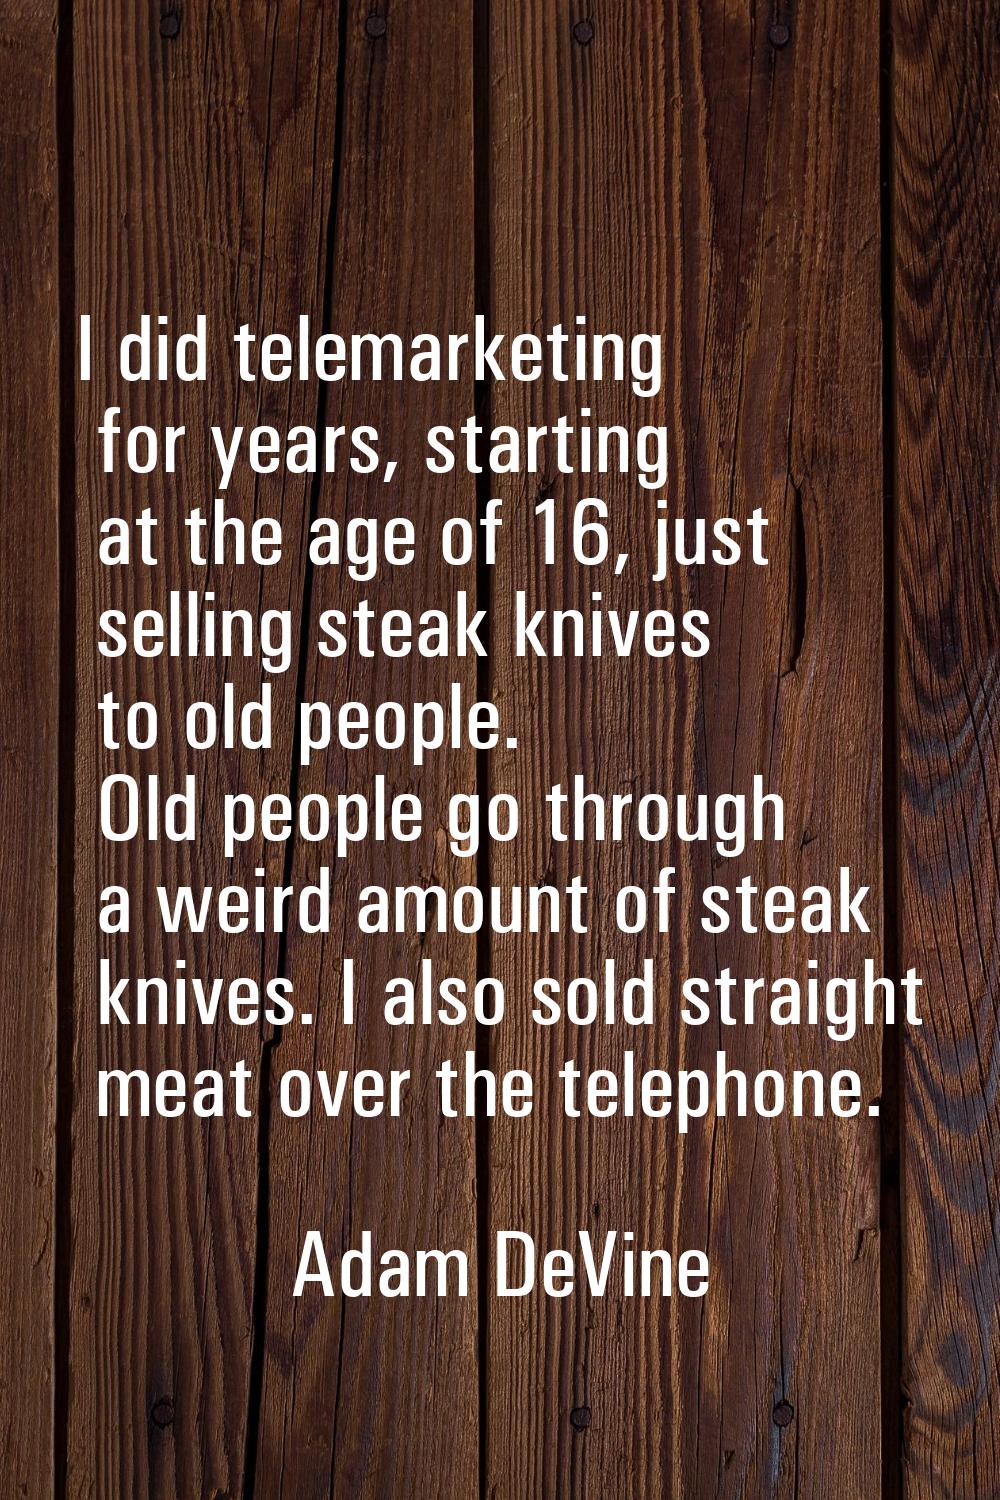 I did telemarketing for years, starting at the age of 16, just selling steak knives to old people. 